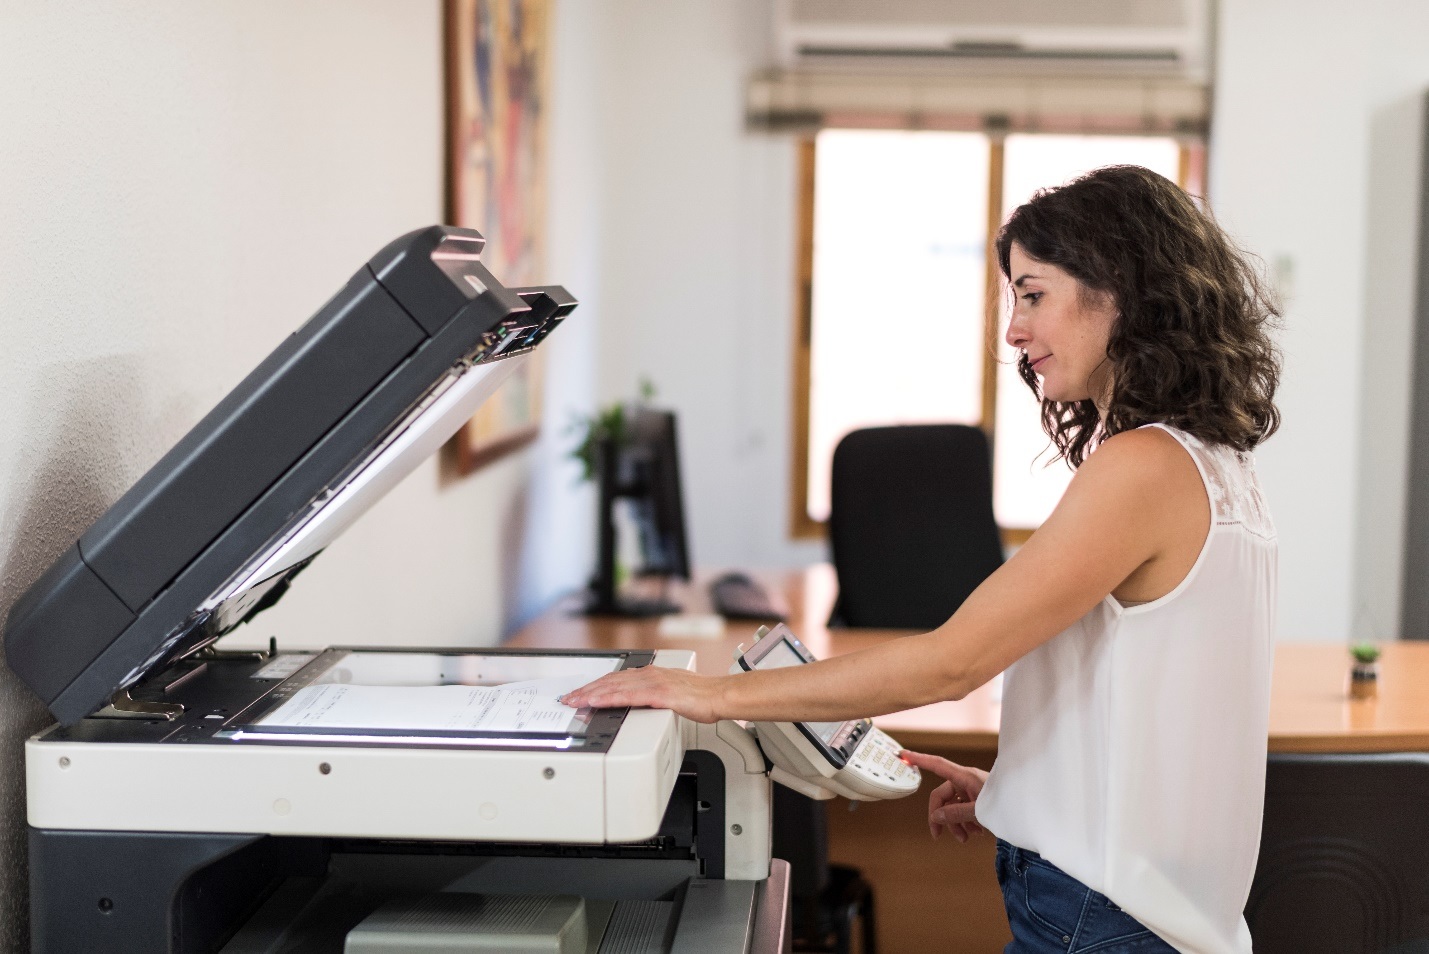 You are currently viewing Choosing the Right Printer for Home Office